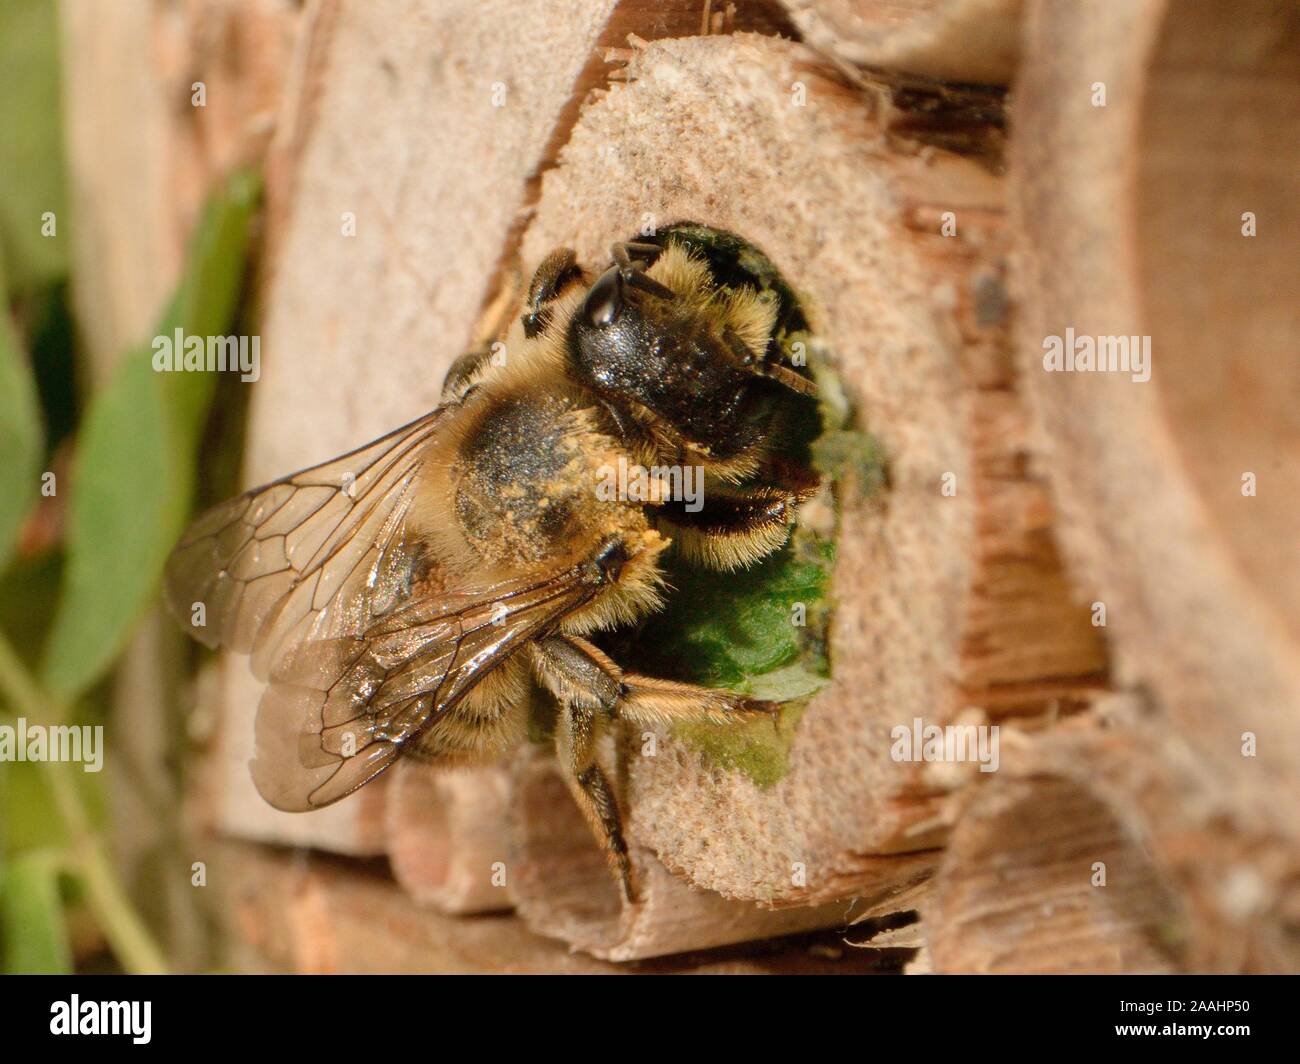 Leaf-cutter / Rose-cutter bee (Megachile willughbiella) using a circular section of Rose leaf to seal its nest in a Bamboo tube in an insect hotel UK Stock Photo